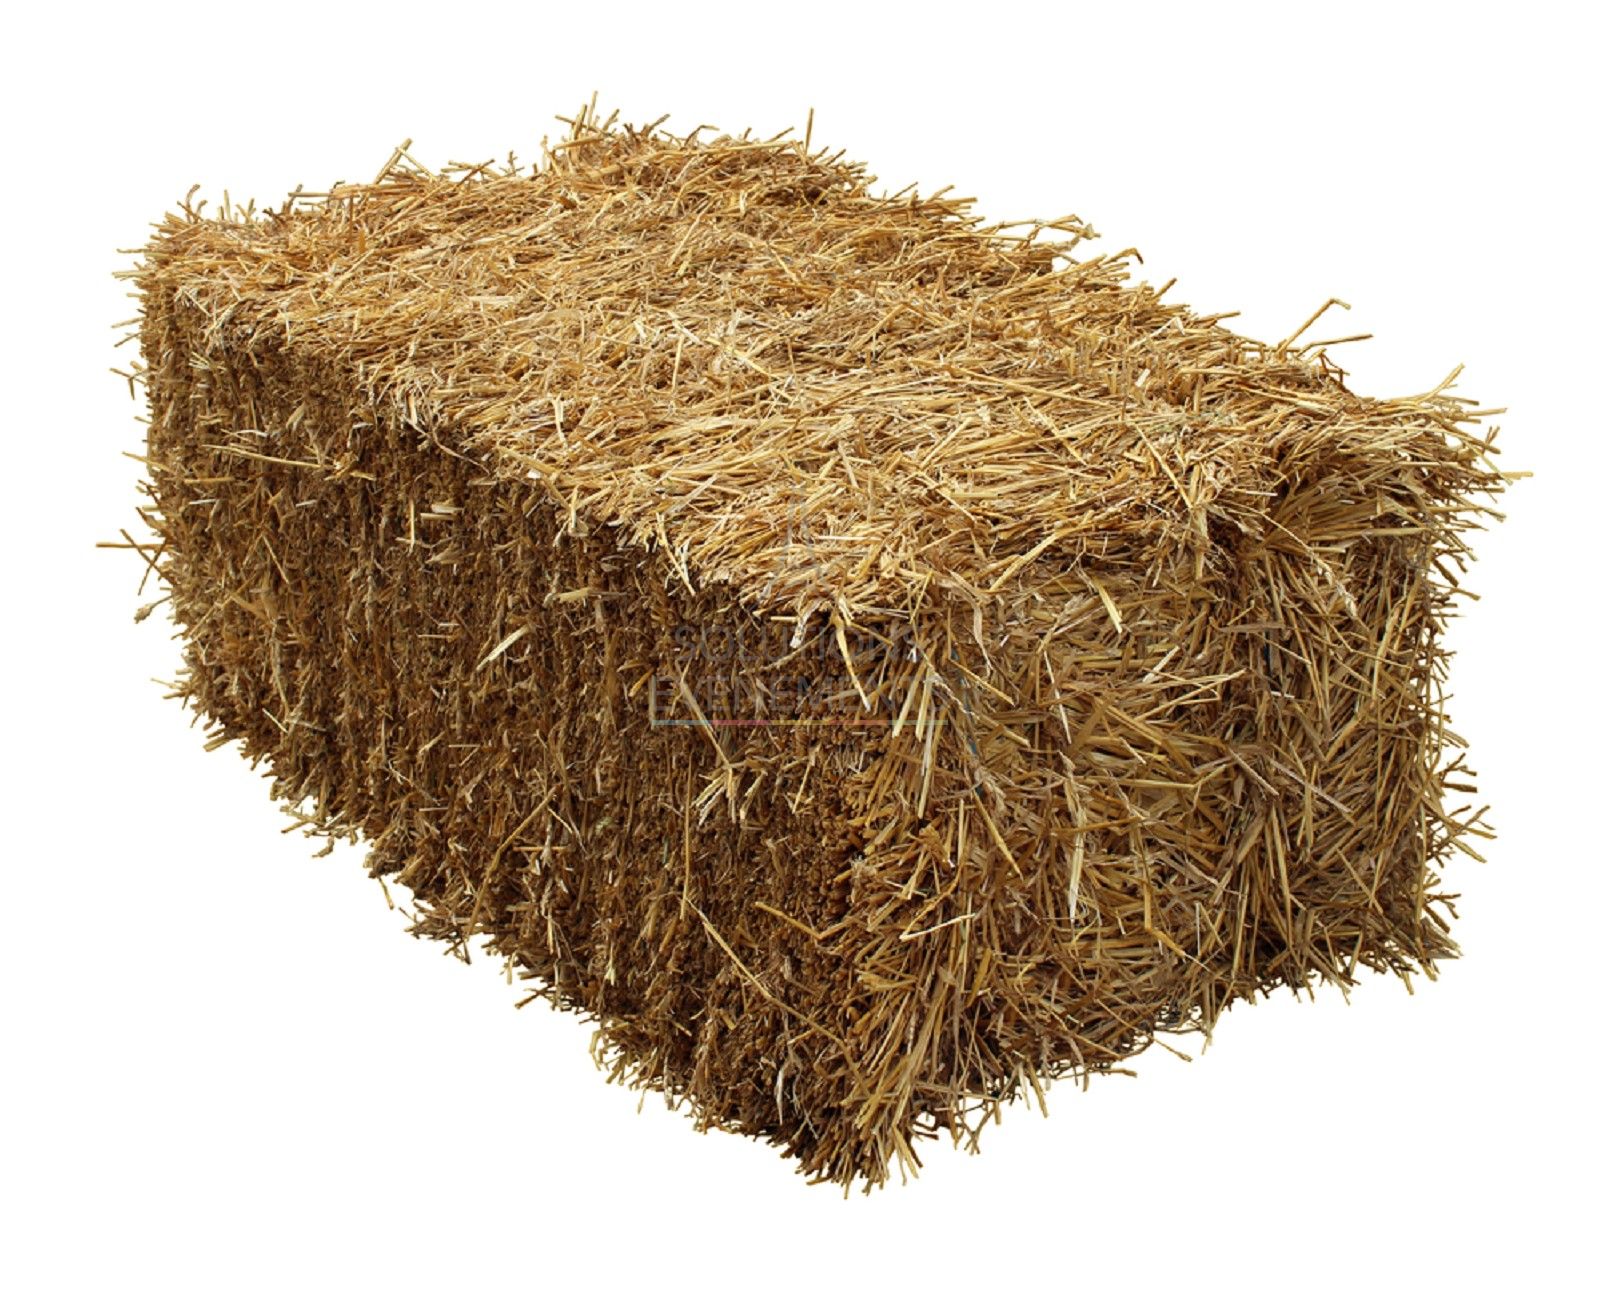 Straw bale rental for outdoor events